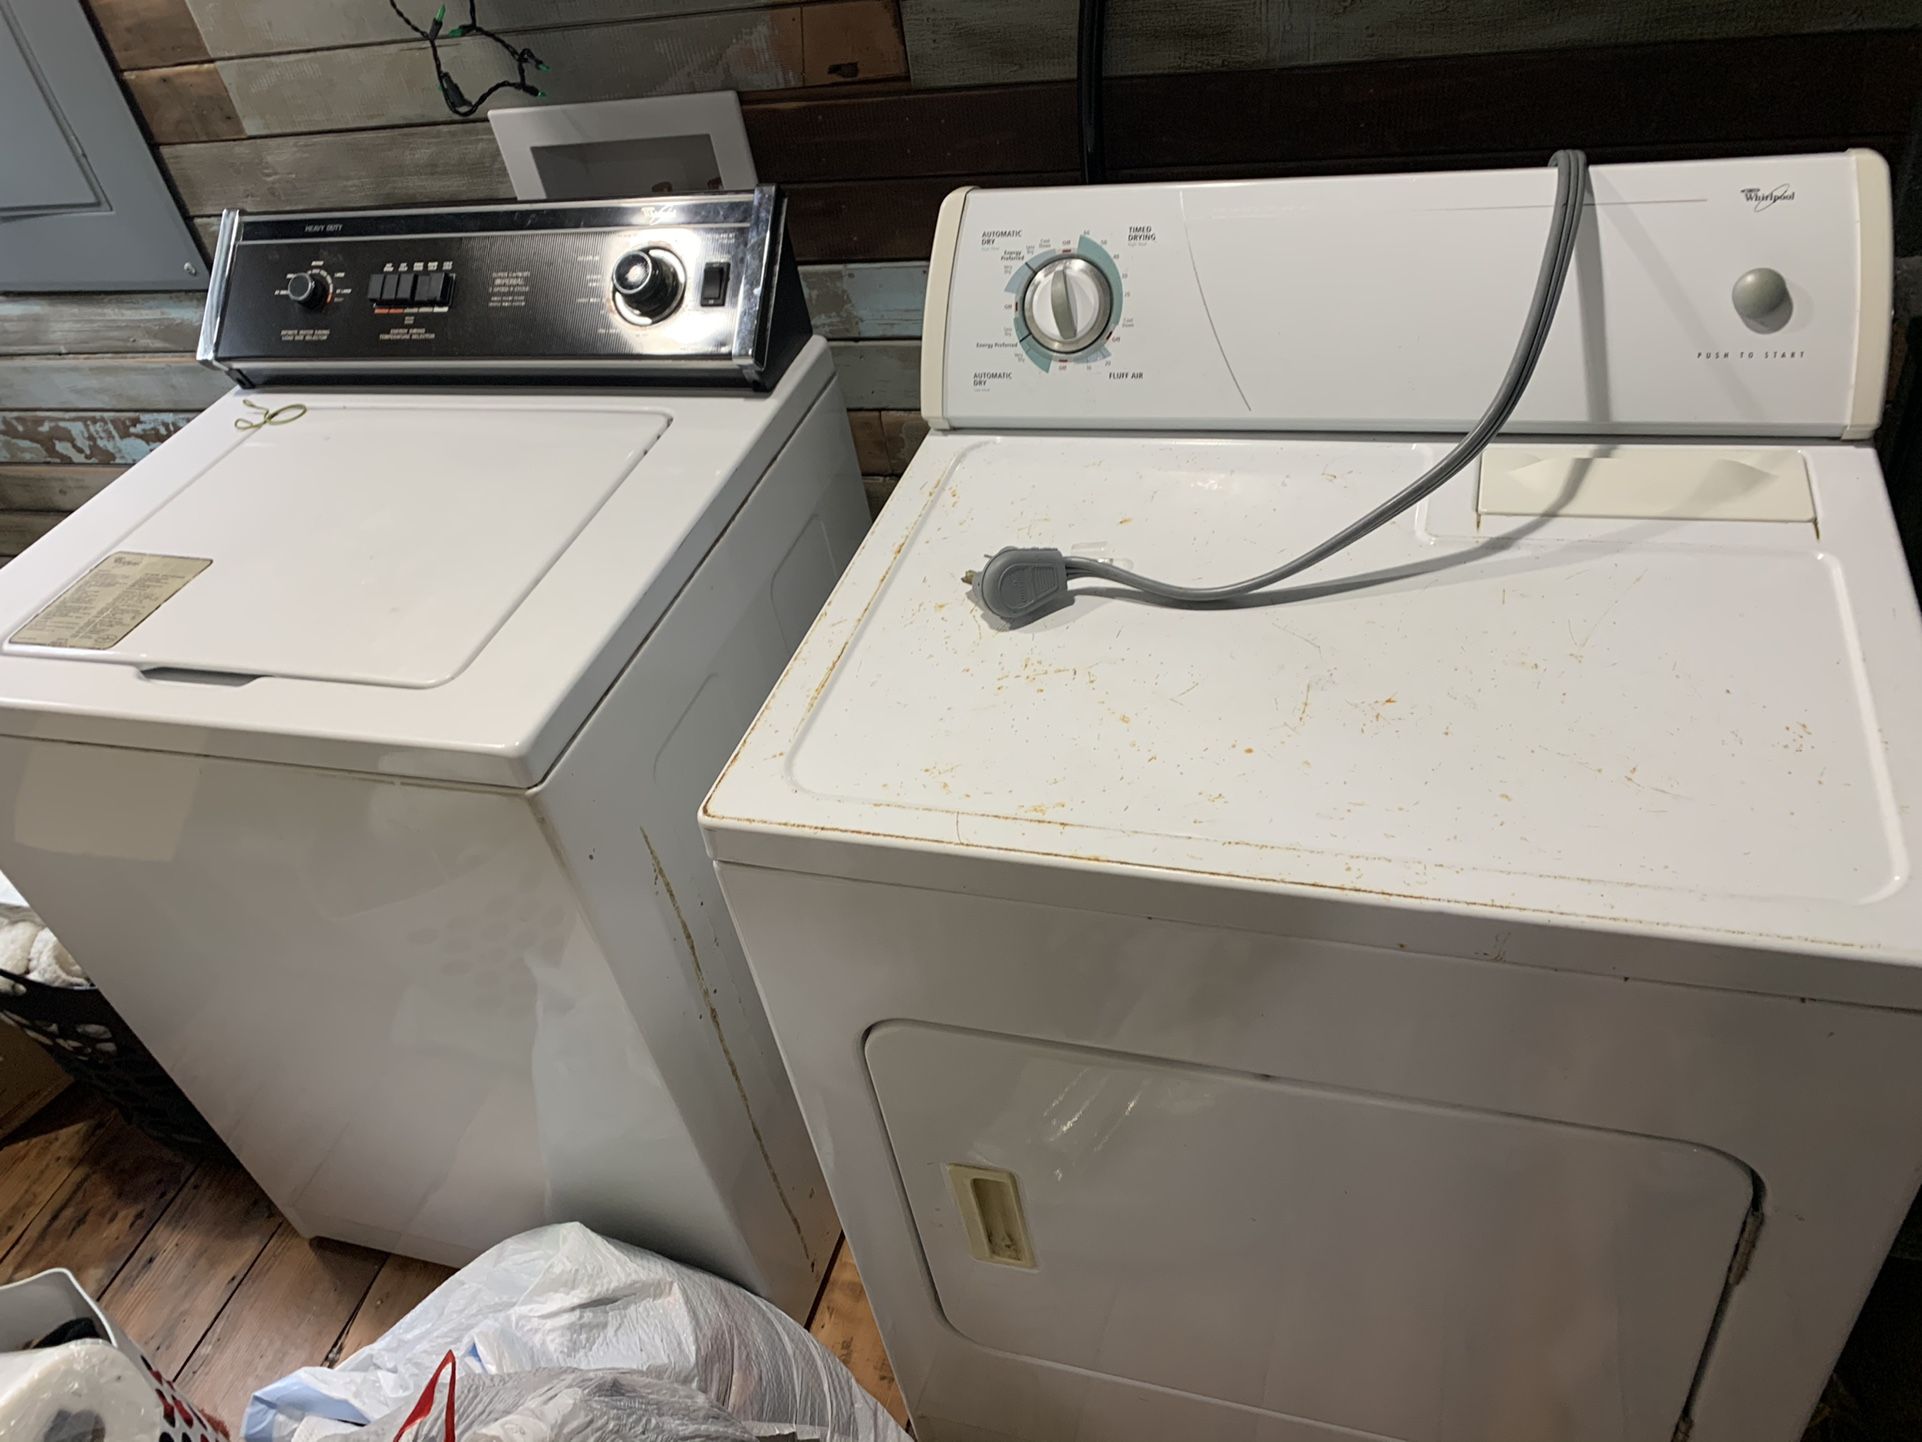 Washer And Dryer $150 For Both You Pick Up